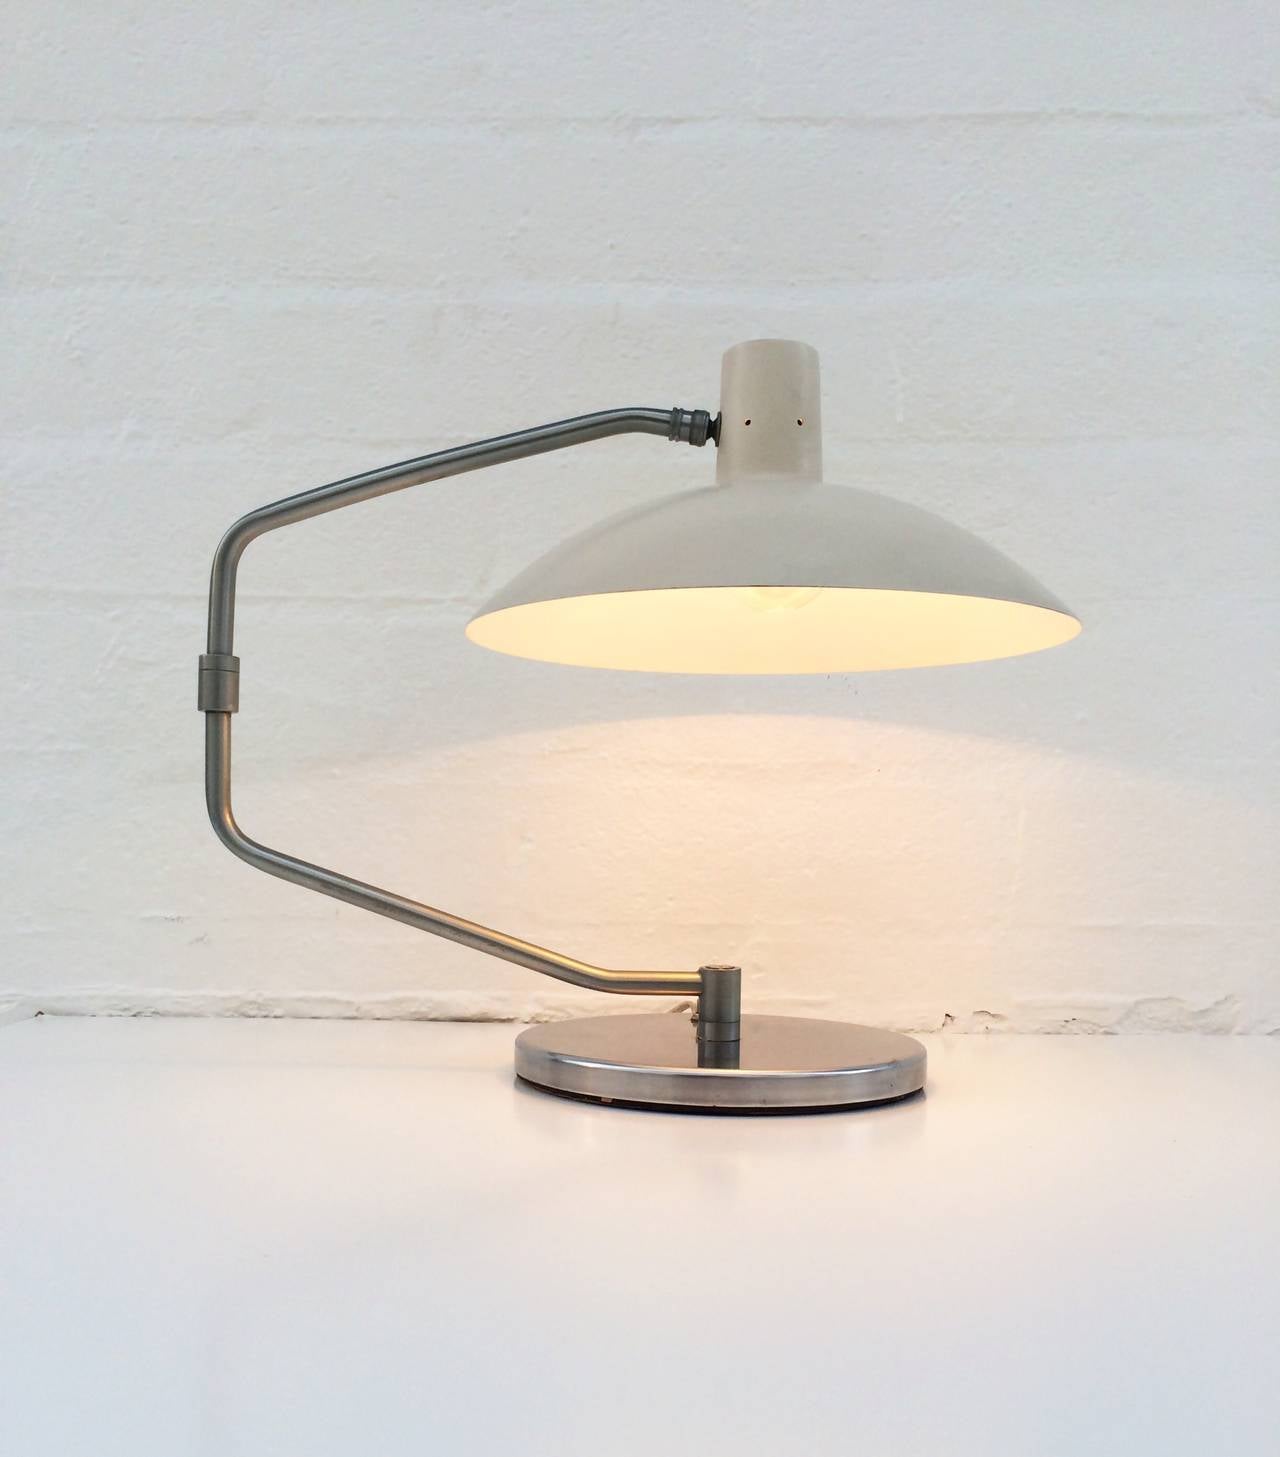 The No.4 desk lamp designed by Clay Michie for Knoll International. 
Consist of a off white enameled shade, a brushed aluminum adjustable arm and base. 
Newly rewired.